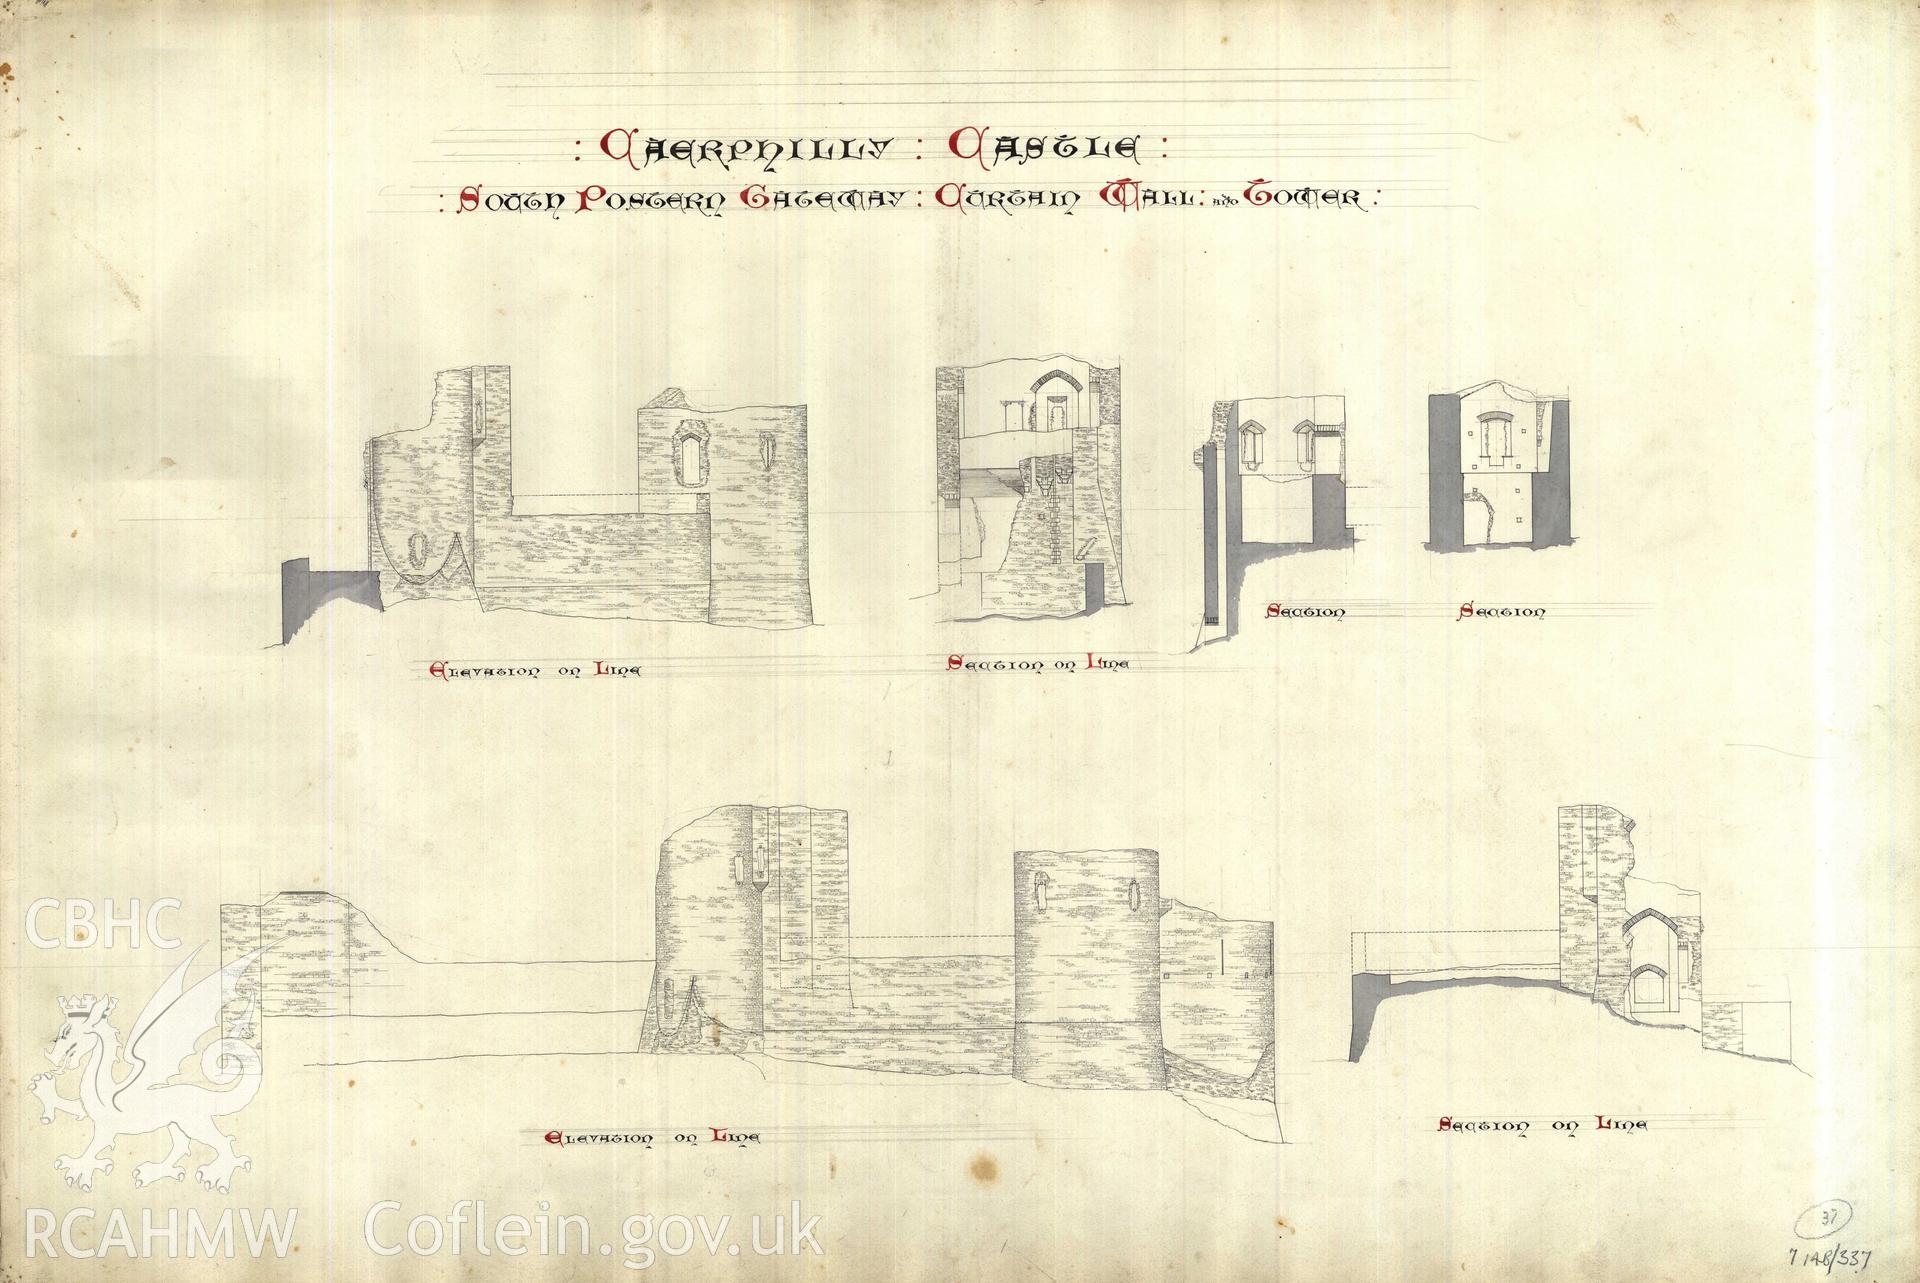 Cadw guardianship monument drawing of Caerphilly Castle. Dam, S part, 2 elevs + 4 sections. Cadw Ref. No:714B/337. Scale 1:96.